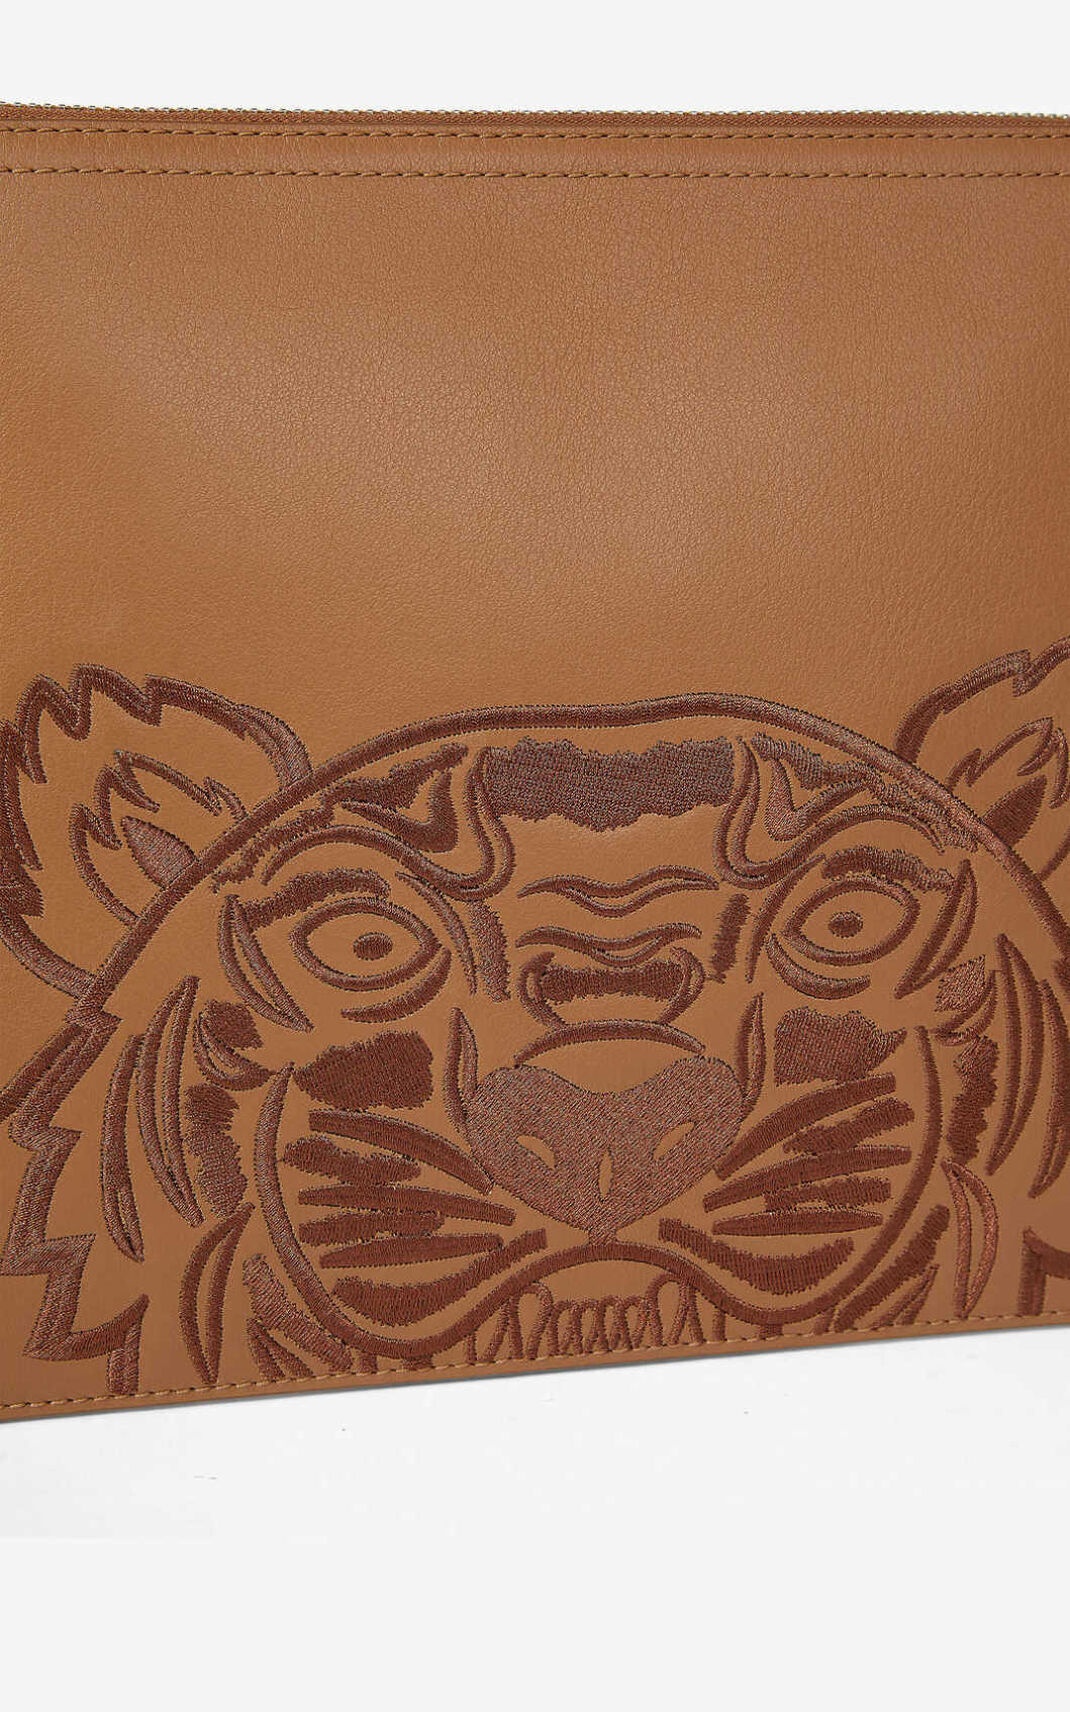 Kampus Tiger large grained leather clutch - 4